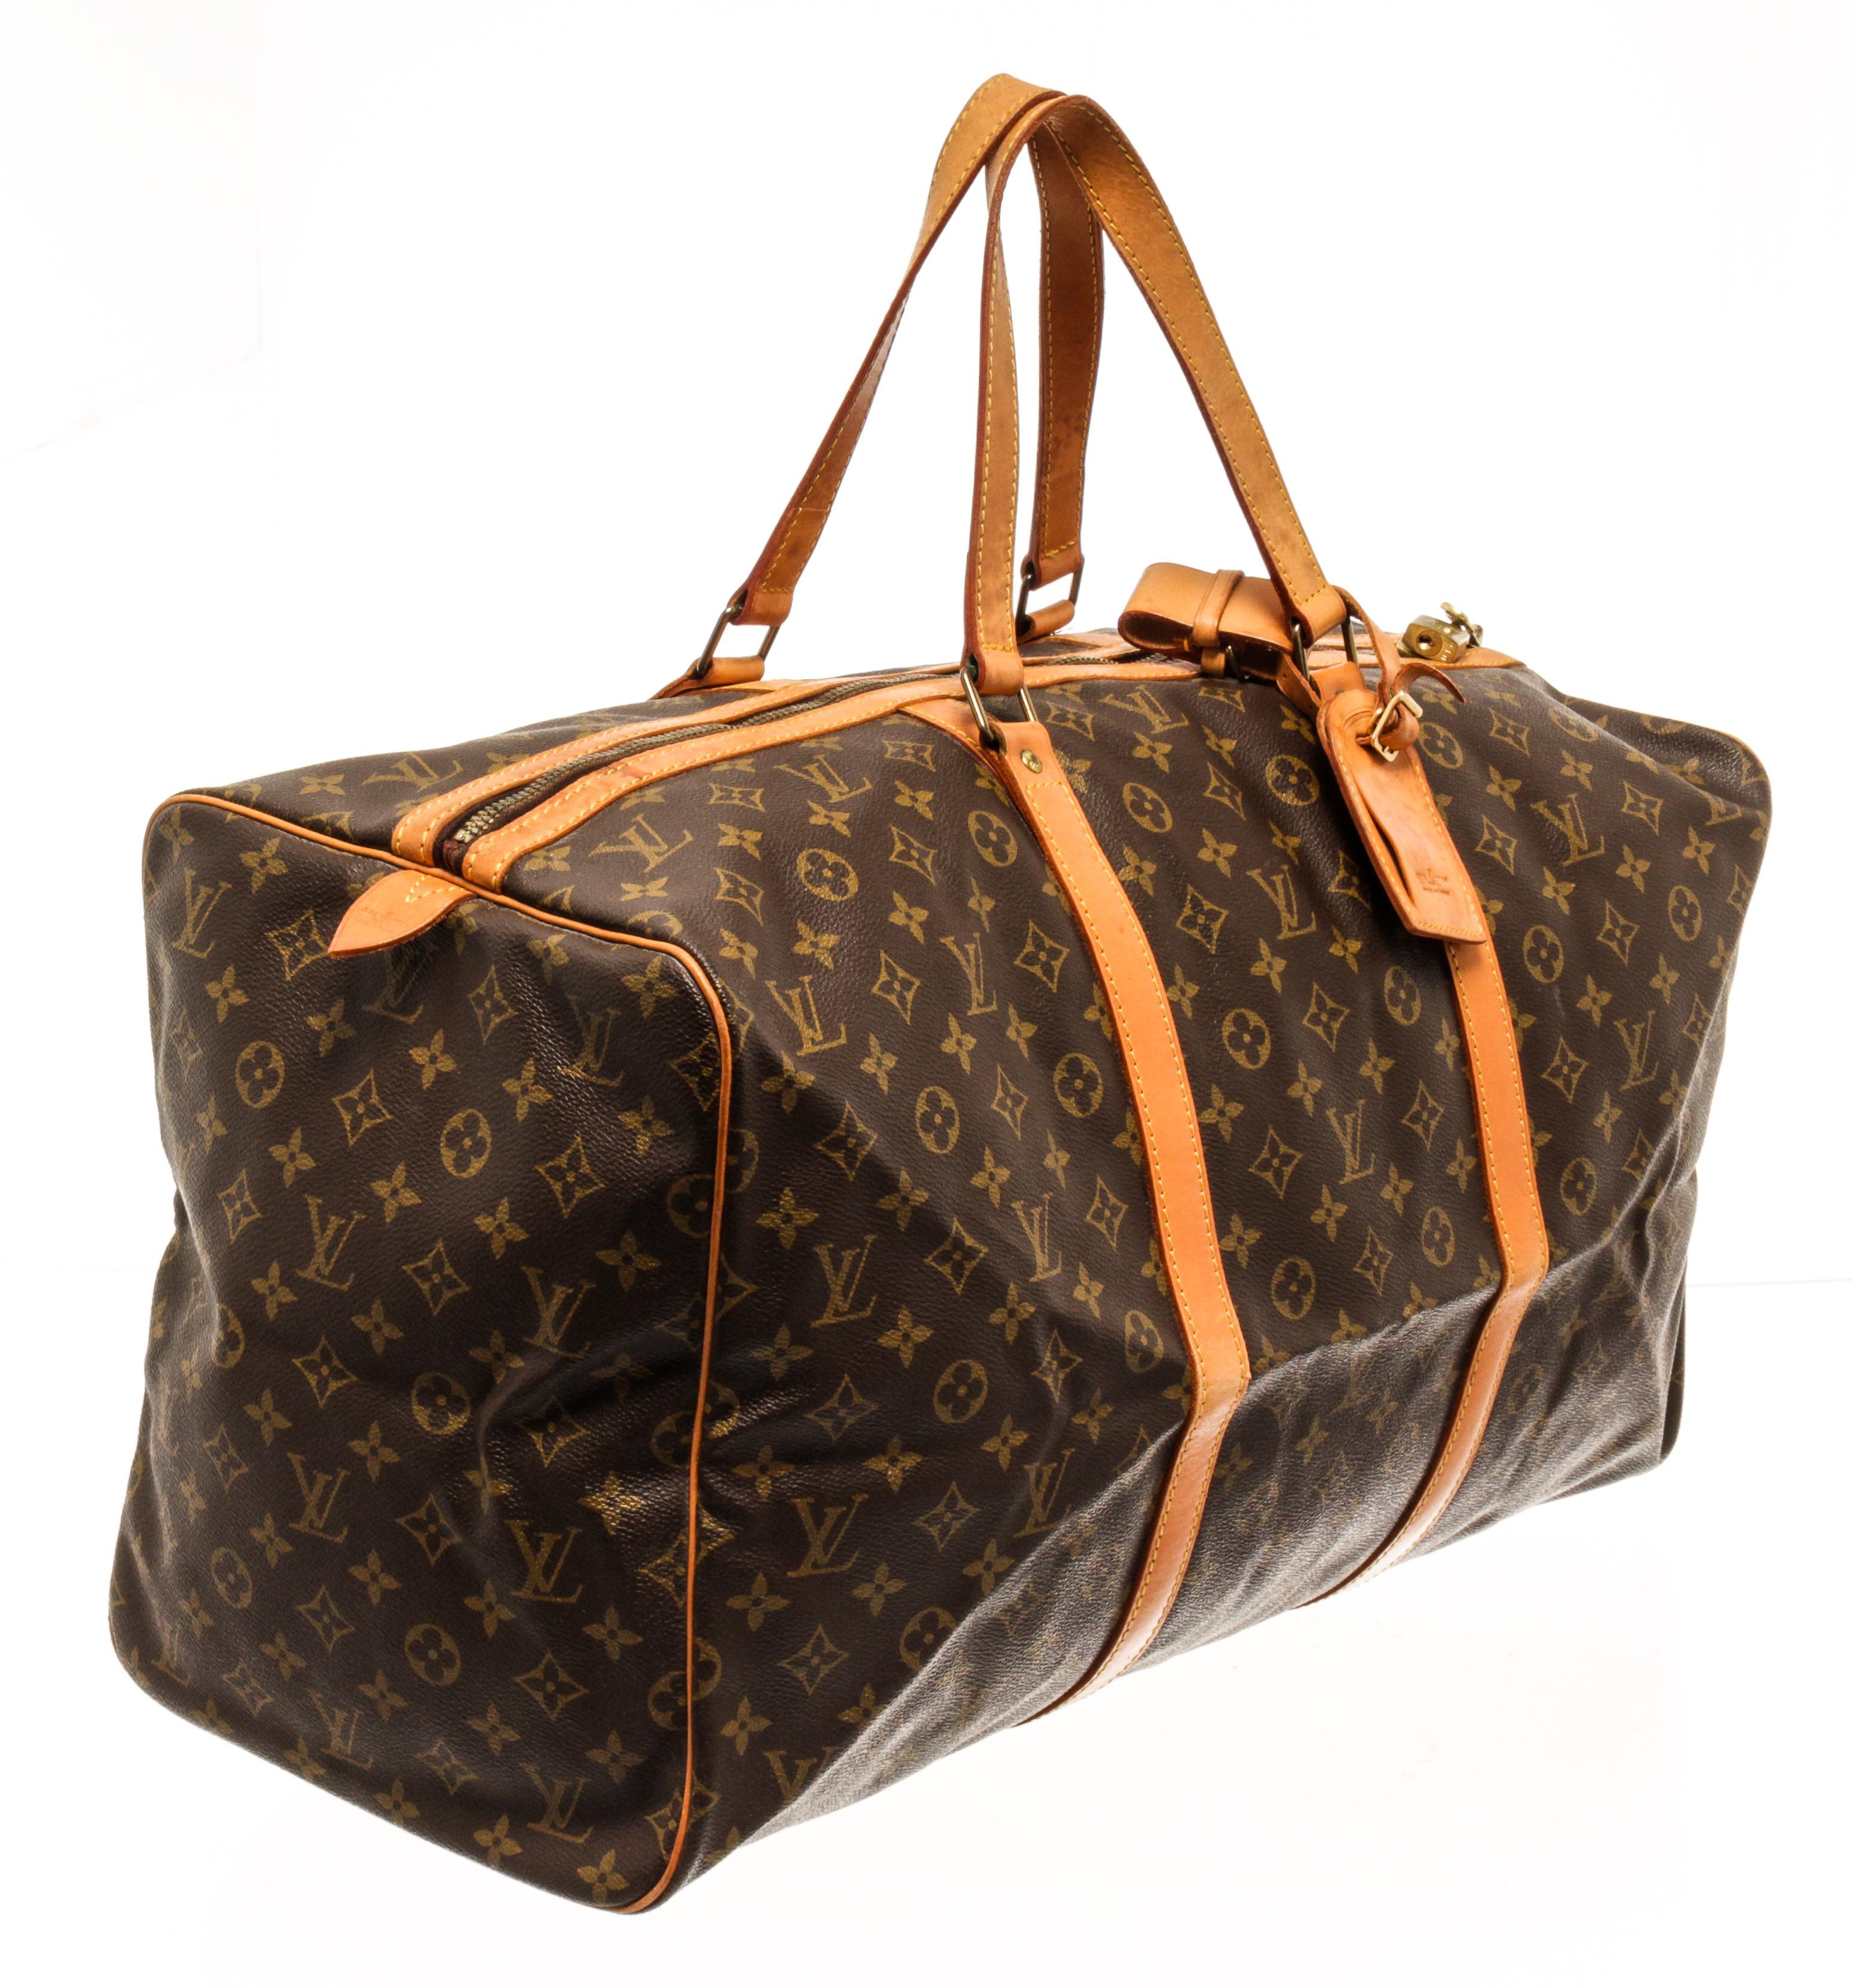 Louis Vuitton Keepall 55 cm duffel bag with monogram coated canvas exterior, contrasting vanchetta leather trims and top handles, brown fabric lining, top zipper closure, gold-tone hardware, lock, and a luggage tag. 

82262MSC